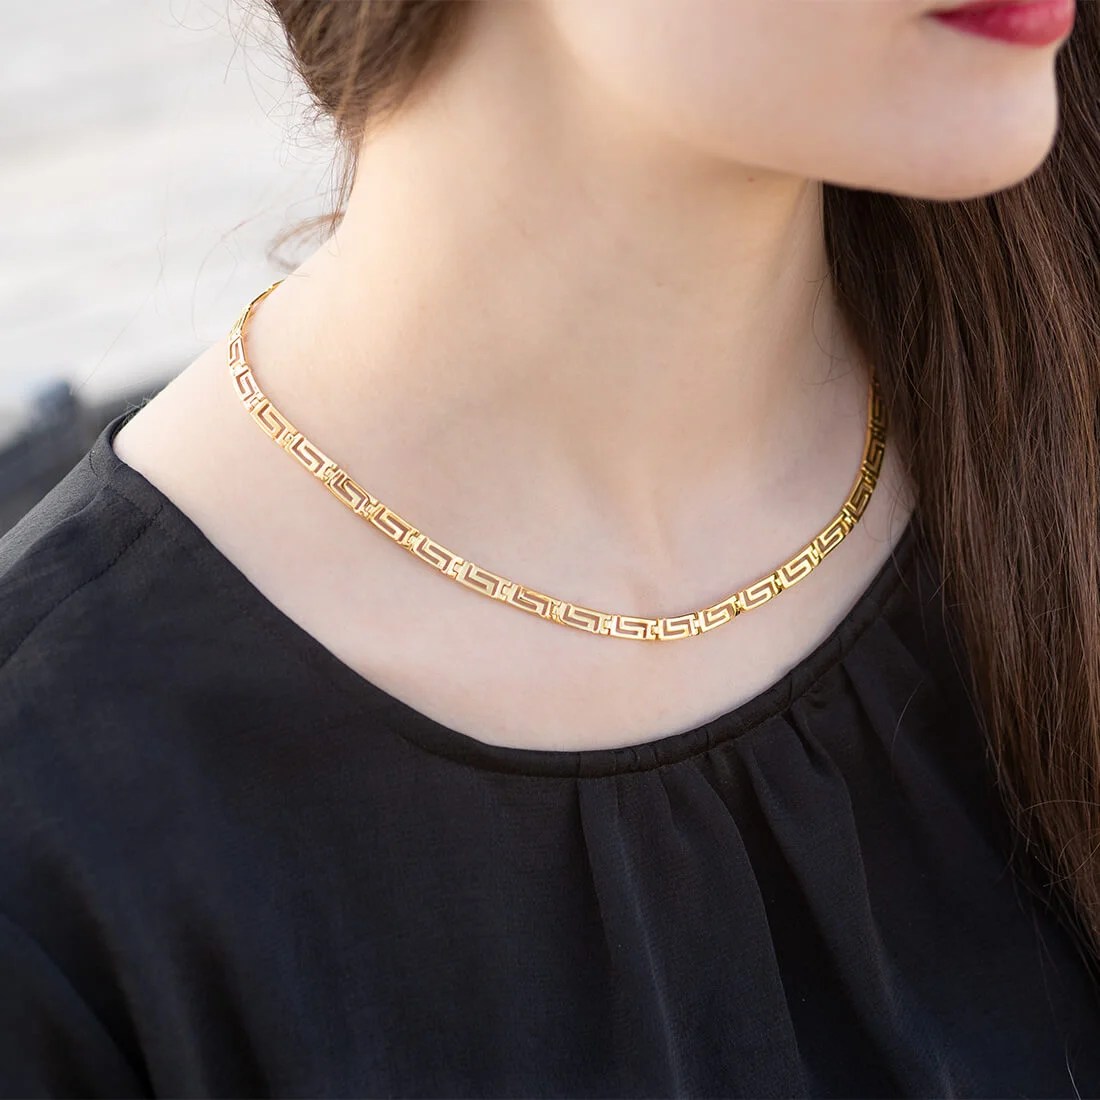 Greek Key Gold Necklace, 14K Solid Gold Necklace, Greek Meander Necklace,  Yellow Gold Necklace, Greek Necklace Jewelry, Delicate Necklace - Etsy